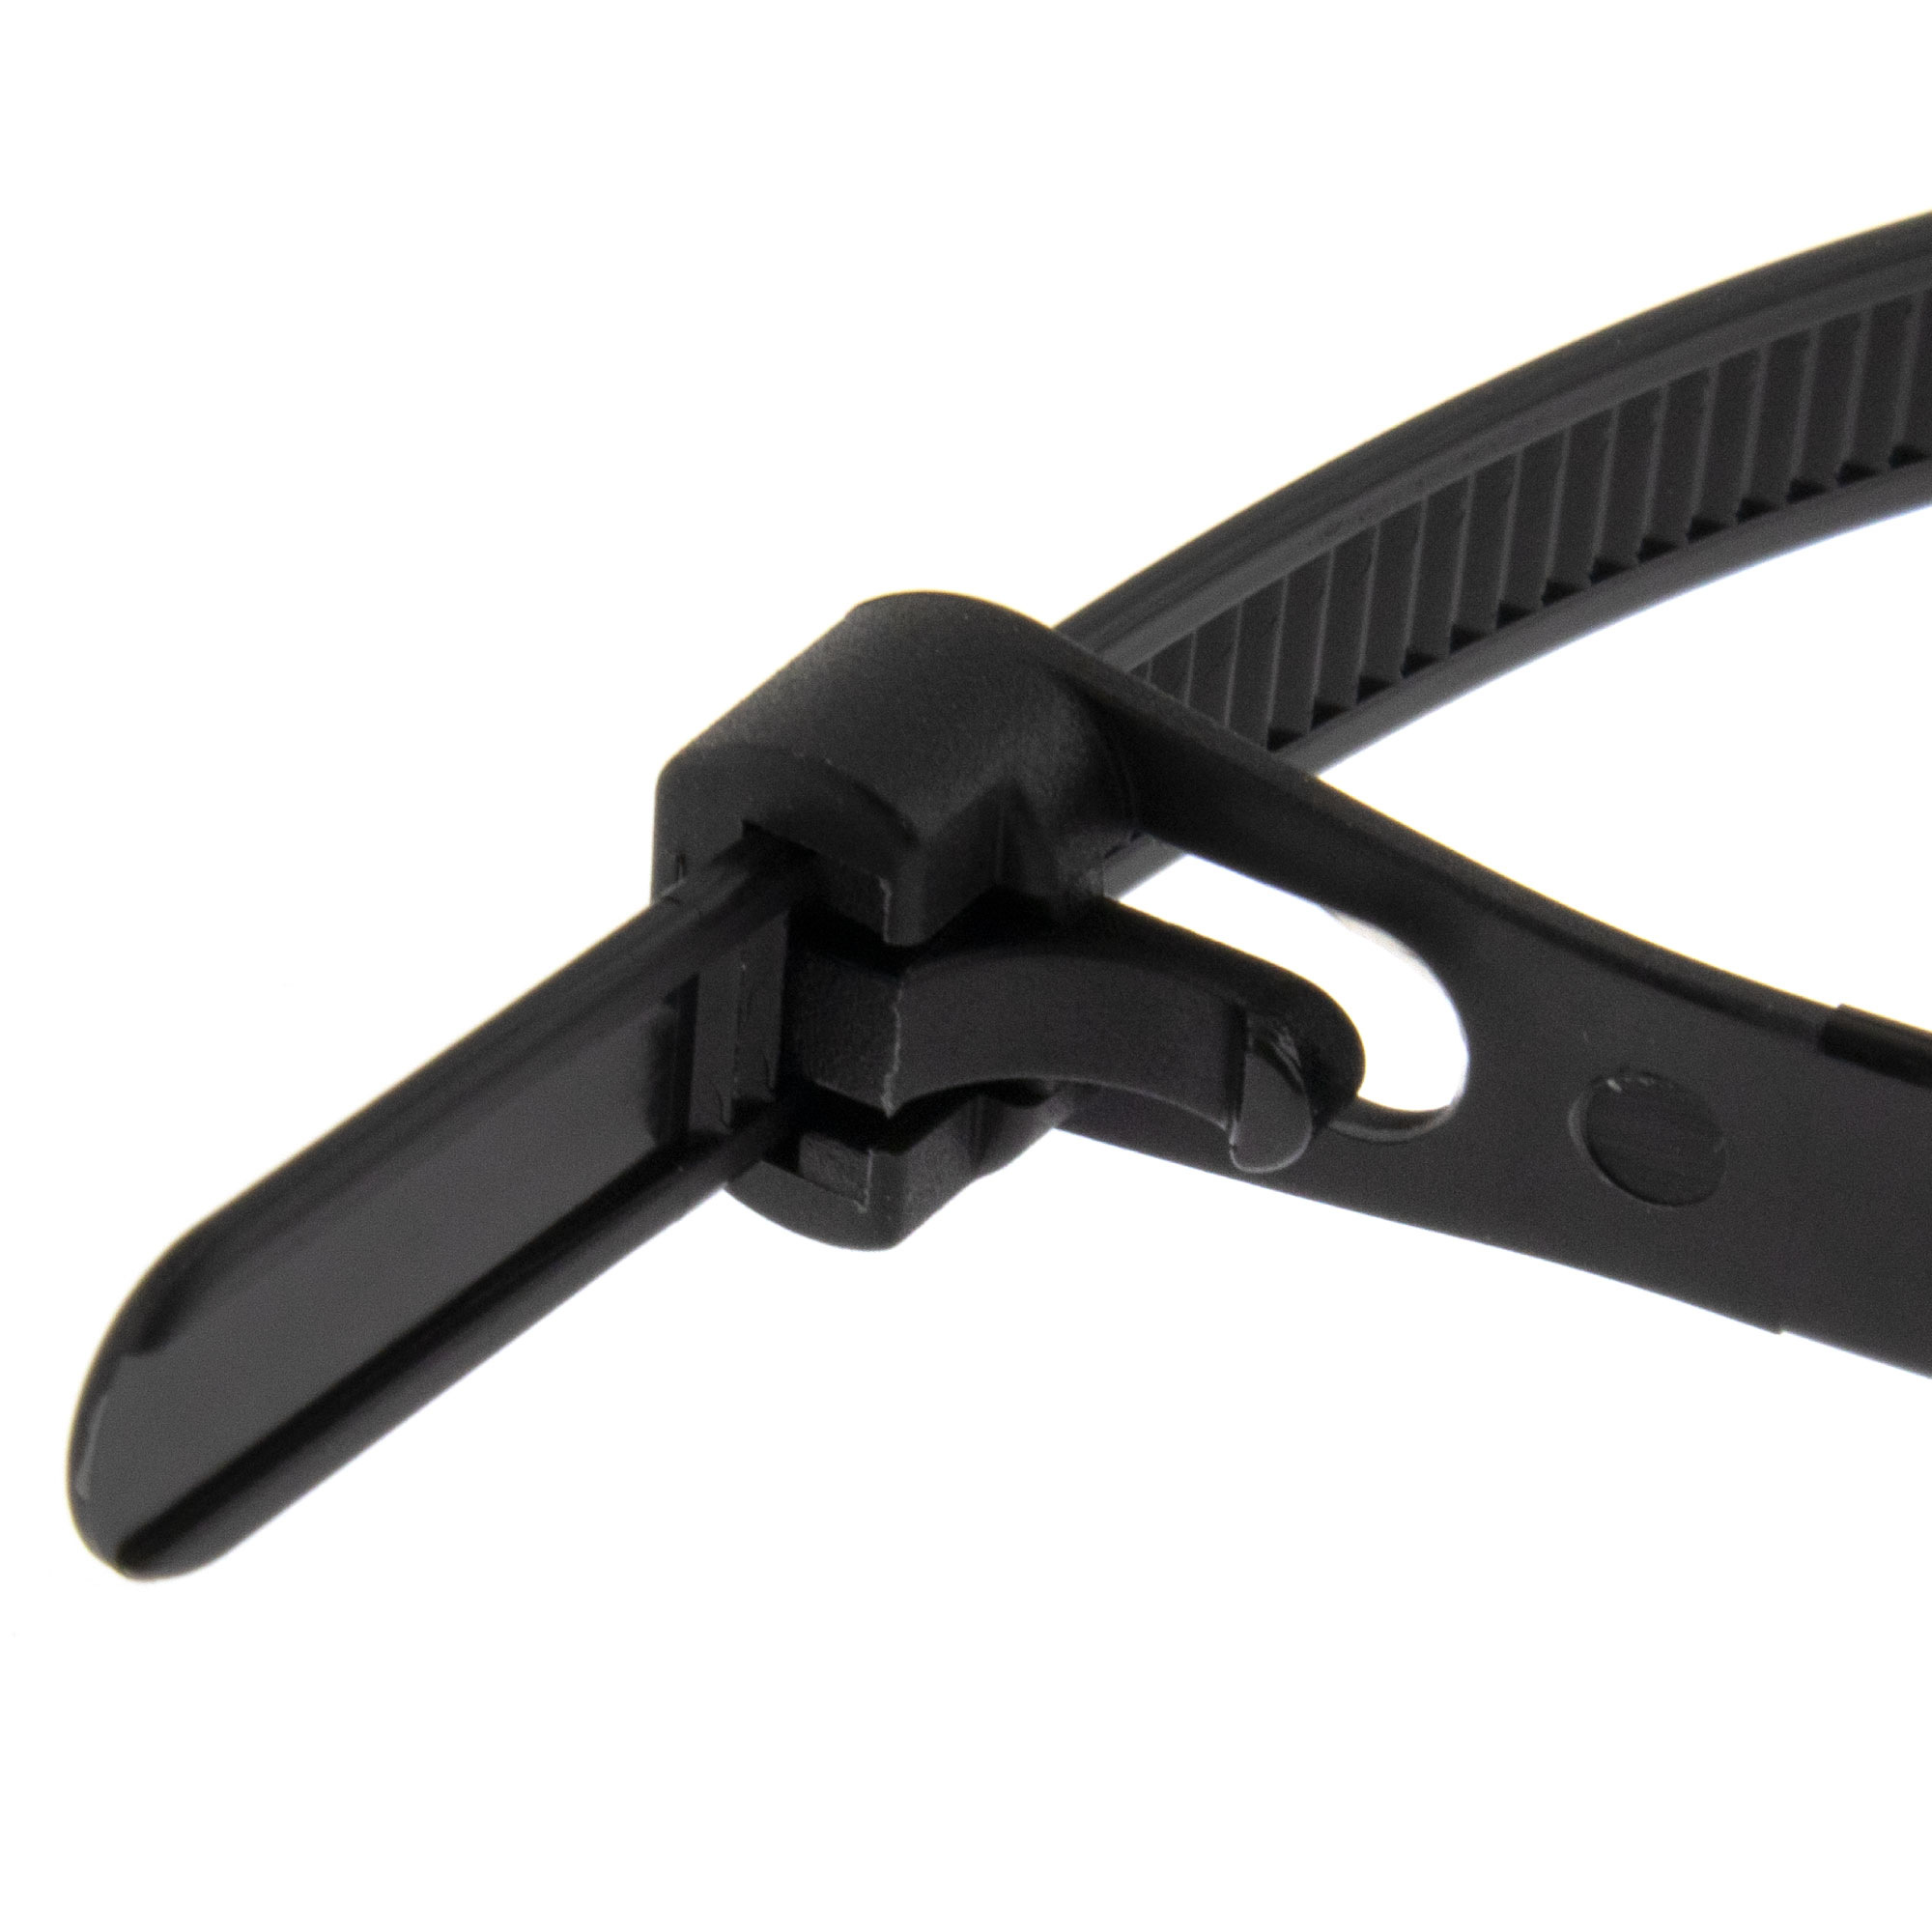 Cable tie re-use-able 300 x 4,8mm, black, 100PCS